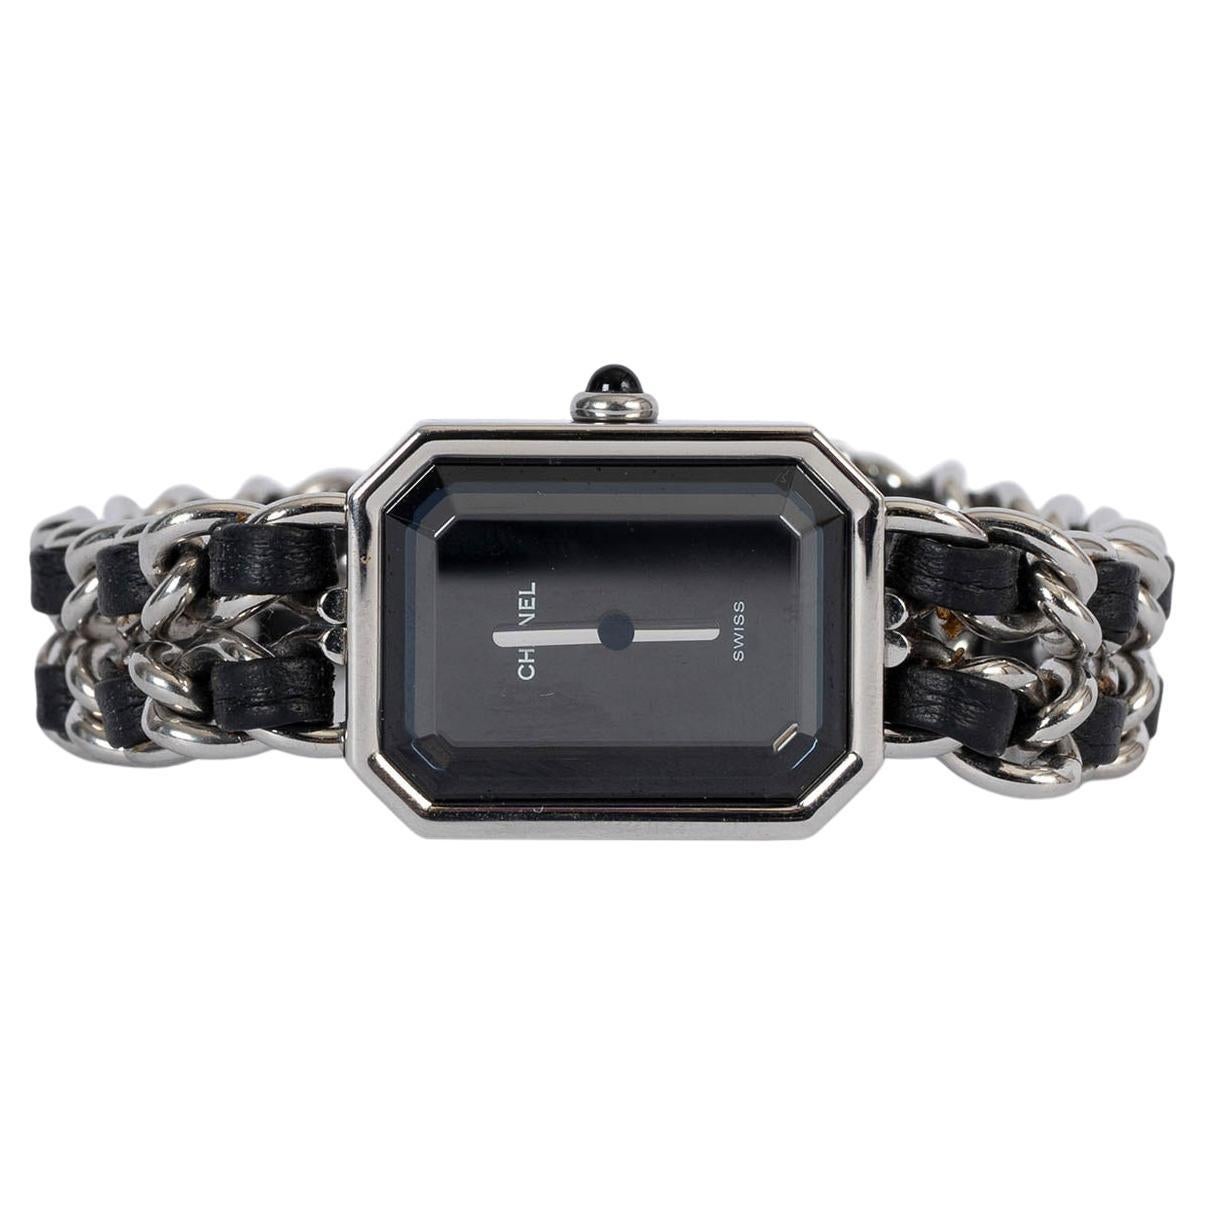 CHANEL stainless steel & black PREMIERE ICON CHAIN Watch